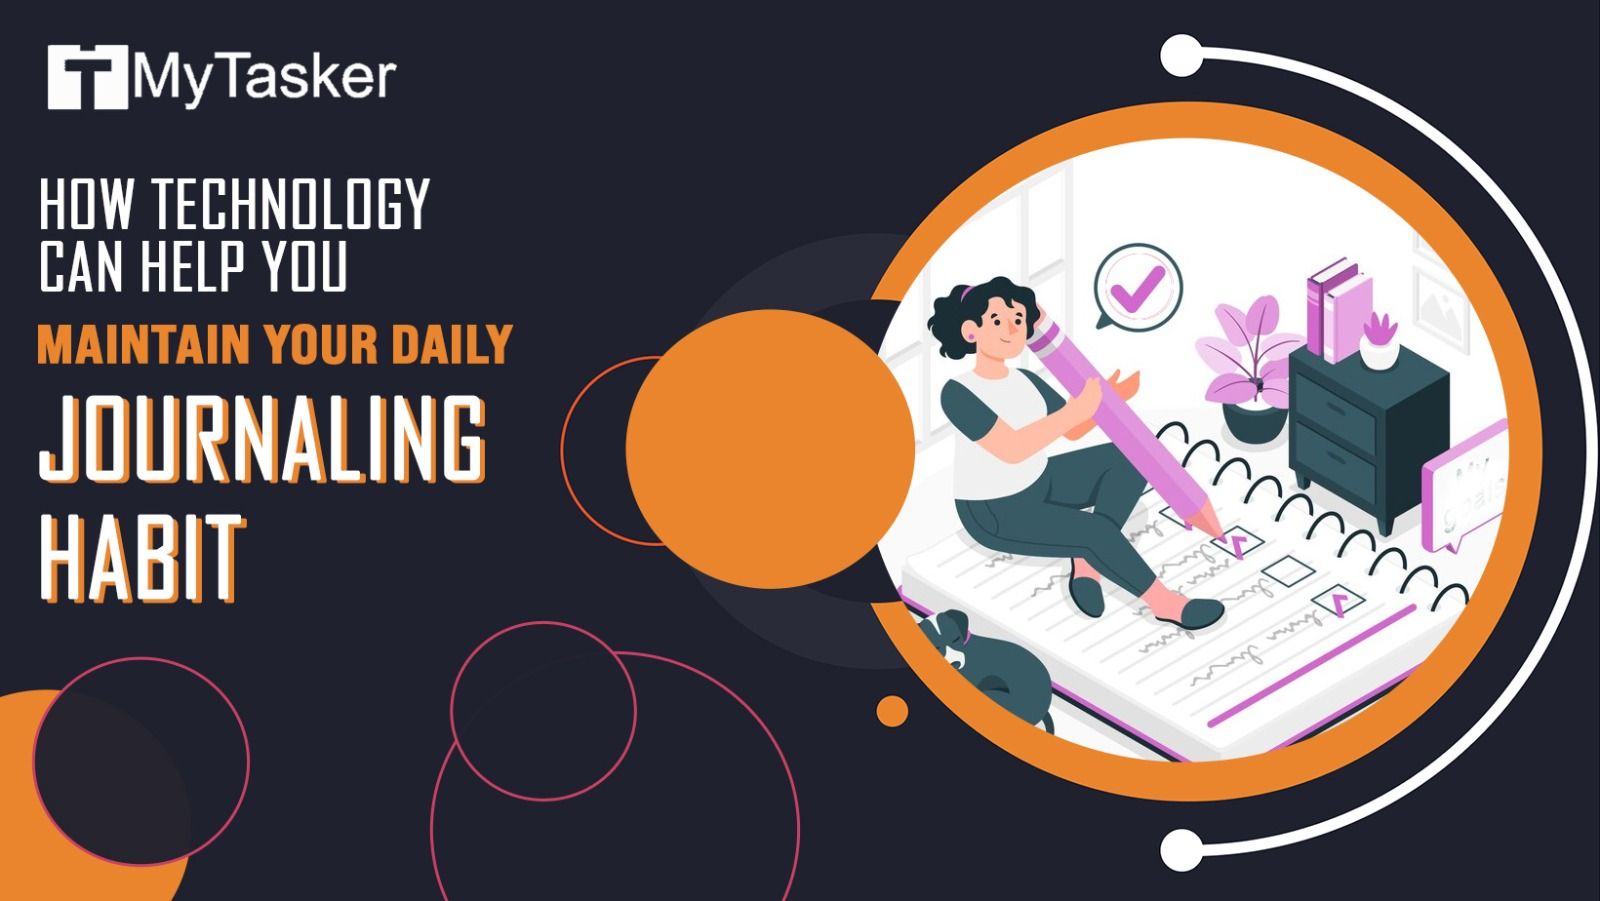 How Technology Can Help You Maintain Your Daily Journaling Habit